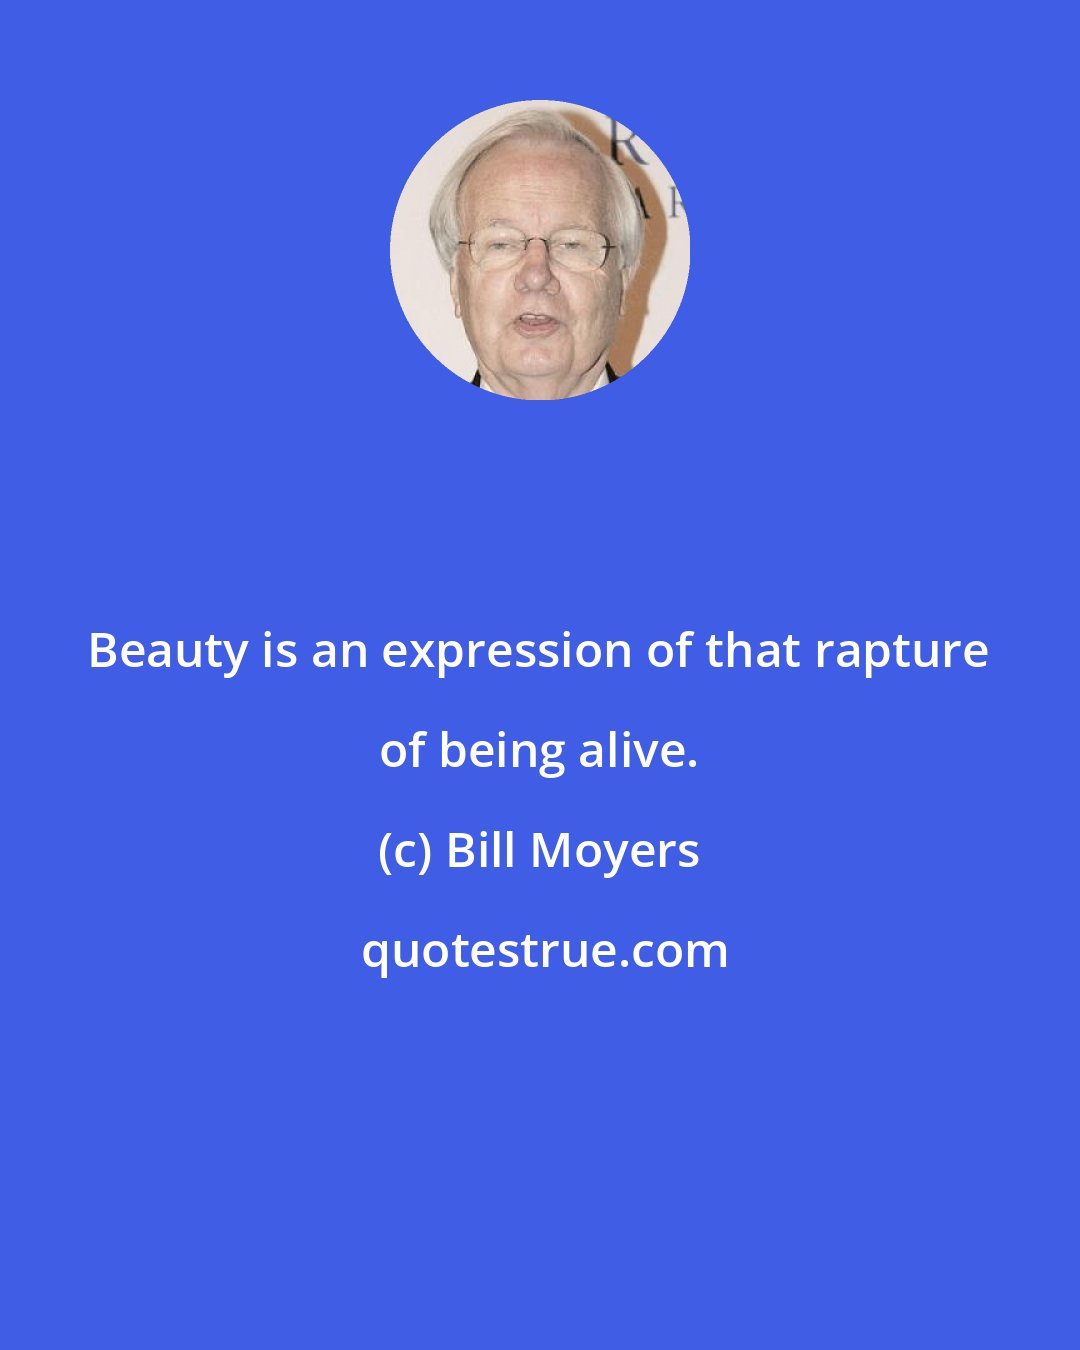 Bill Moyers: Beauty is an expression of that rapture of being alive.